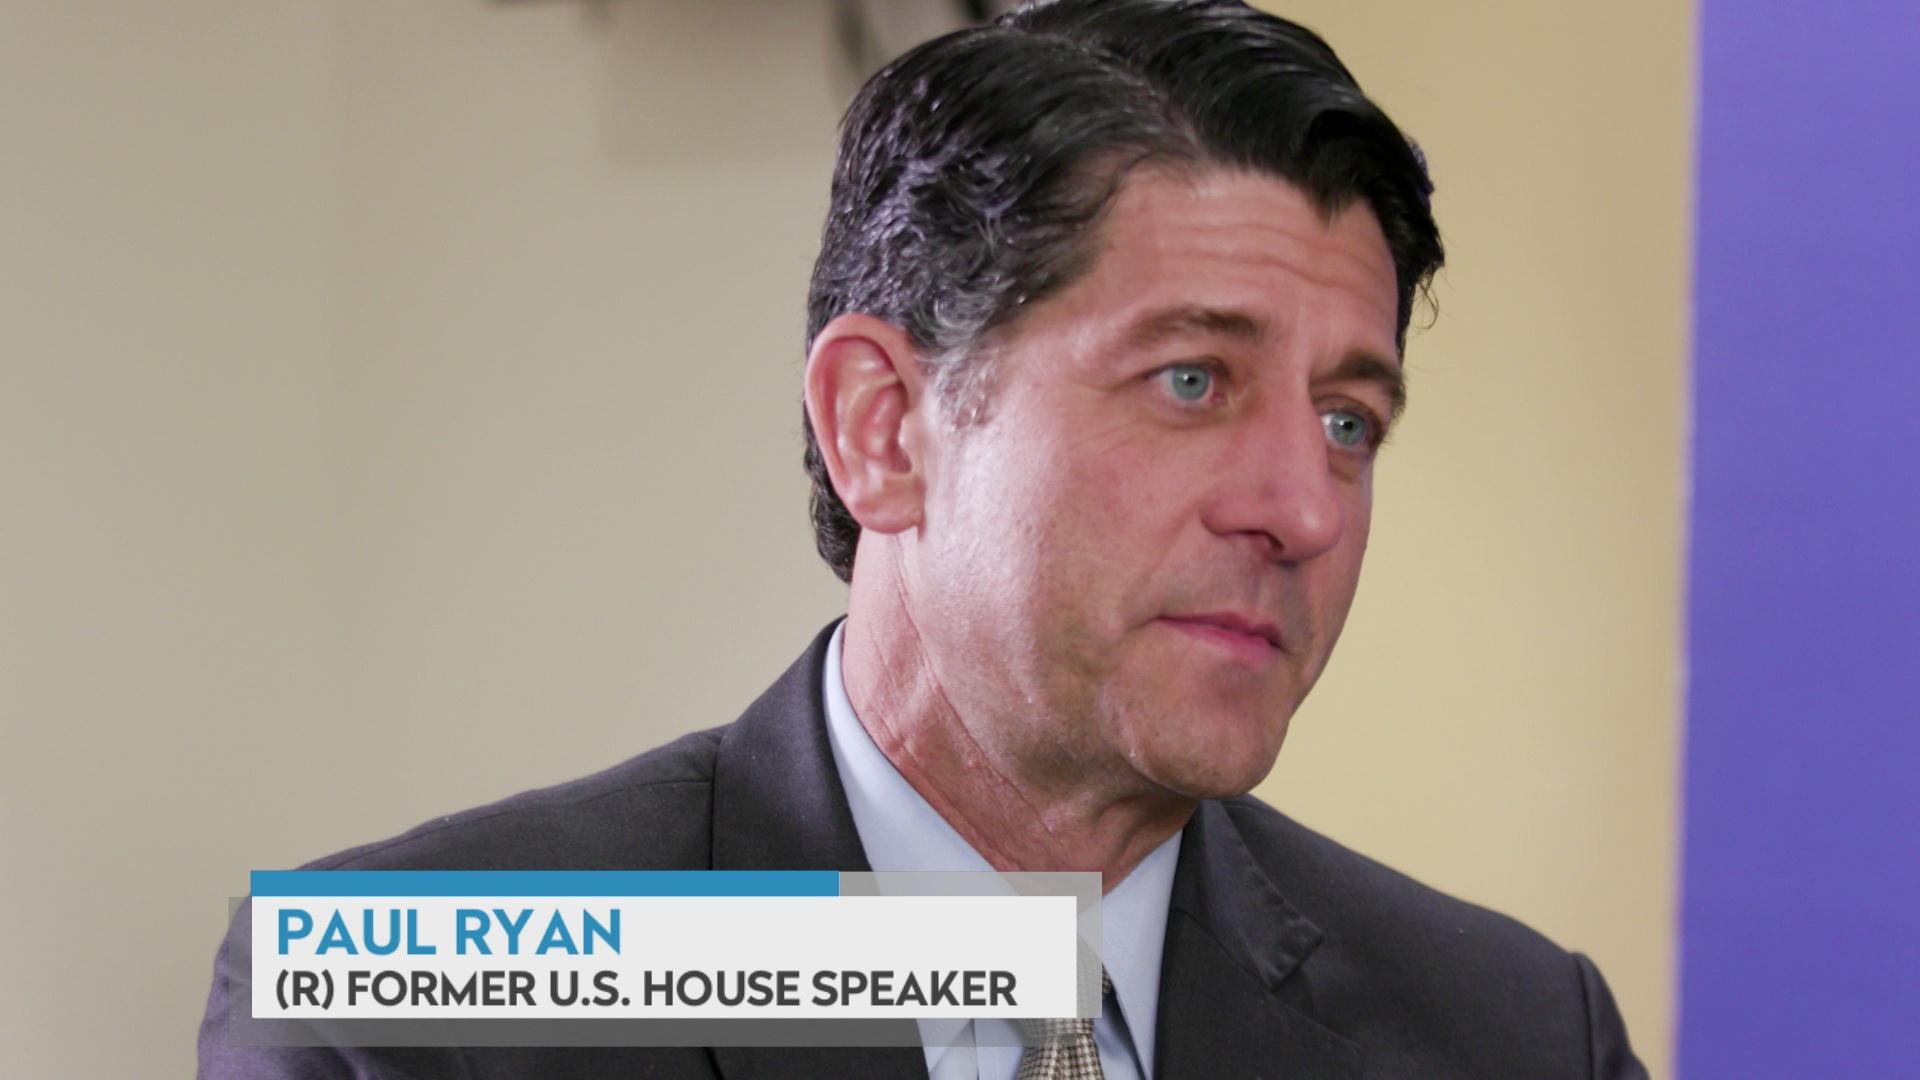 Paul Ryan on America’s political landscape going into 2024